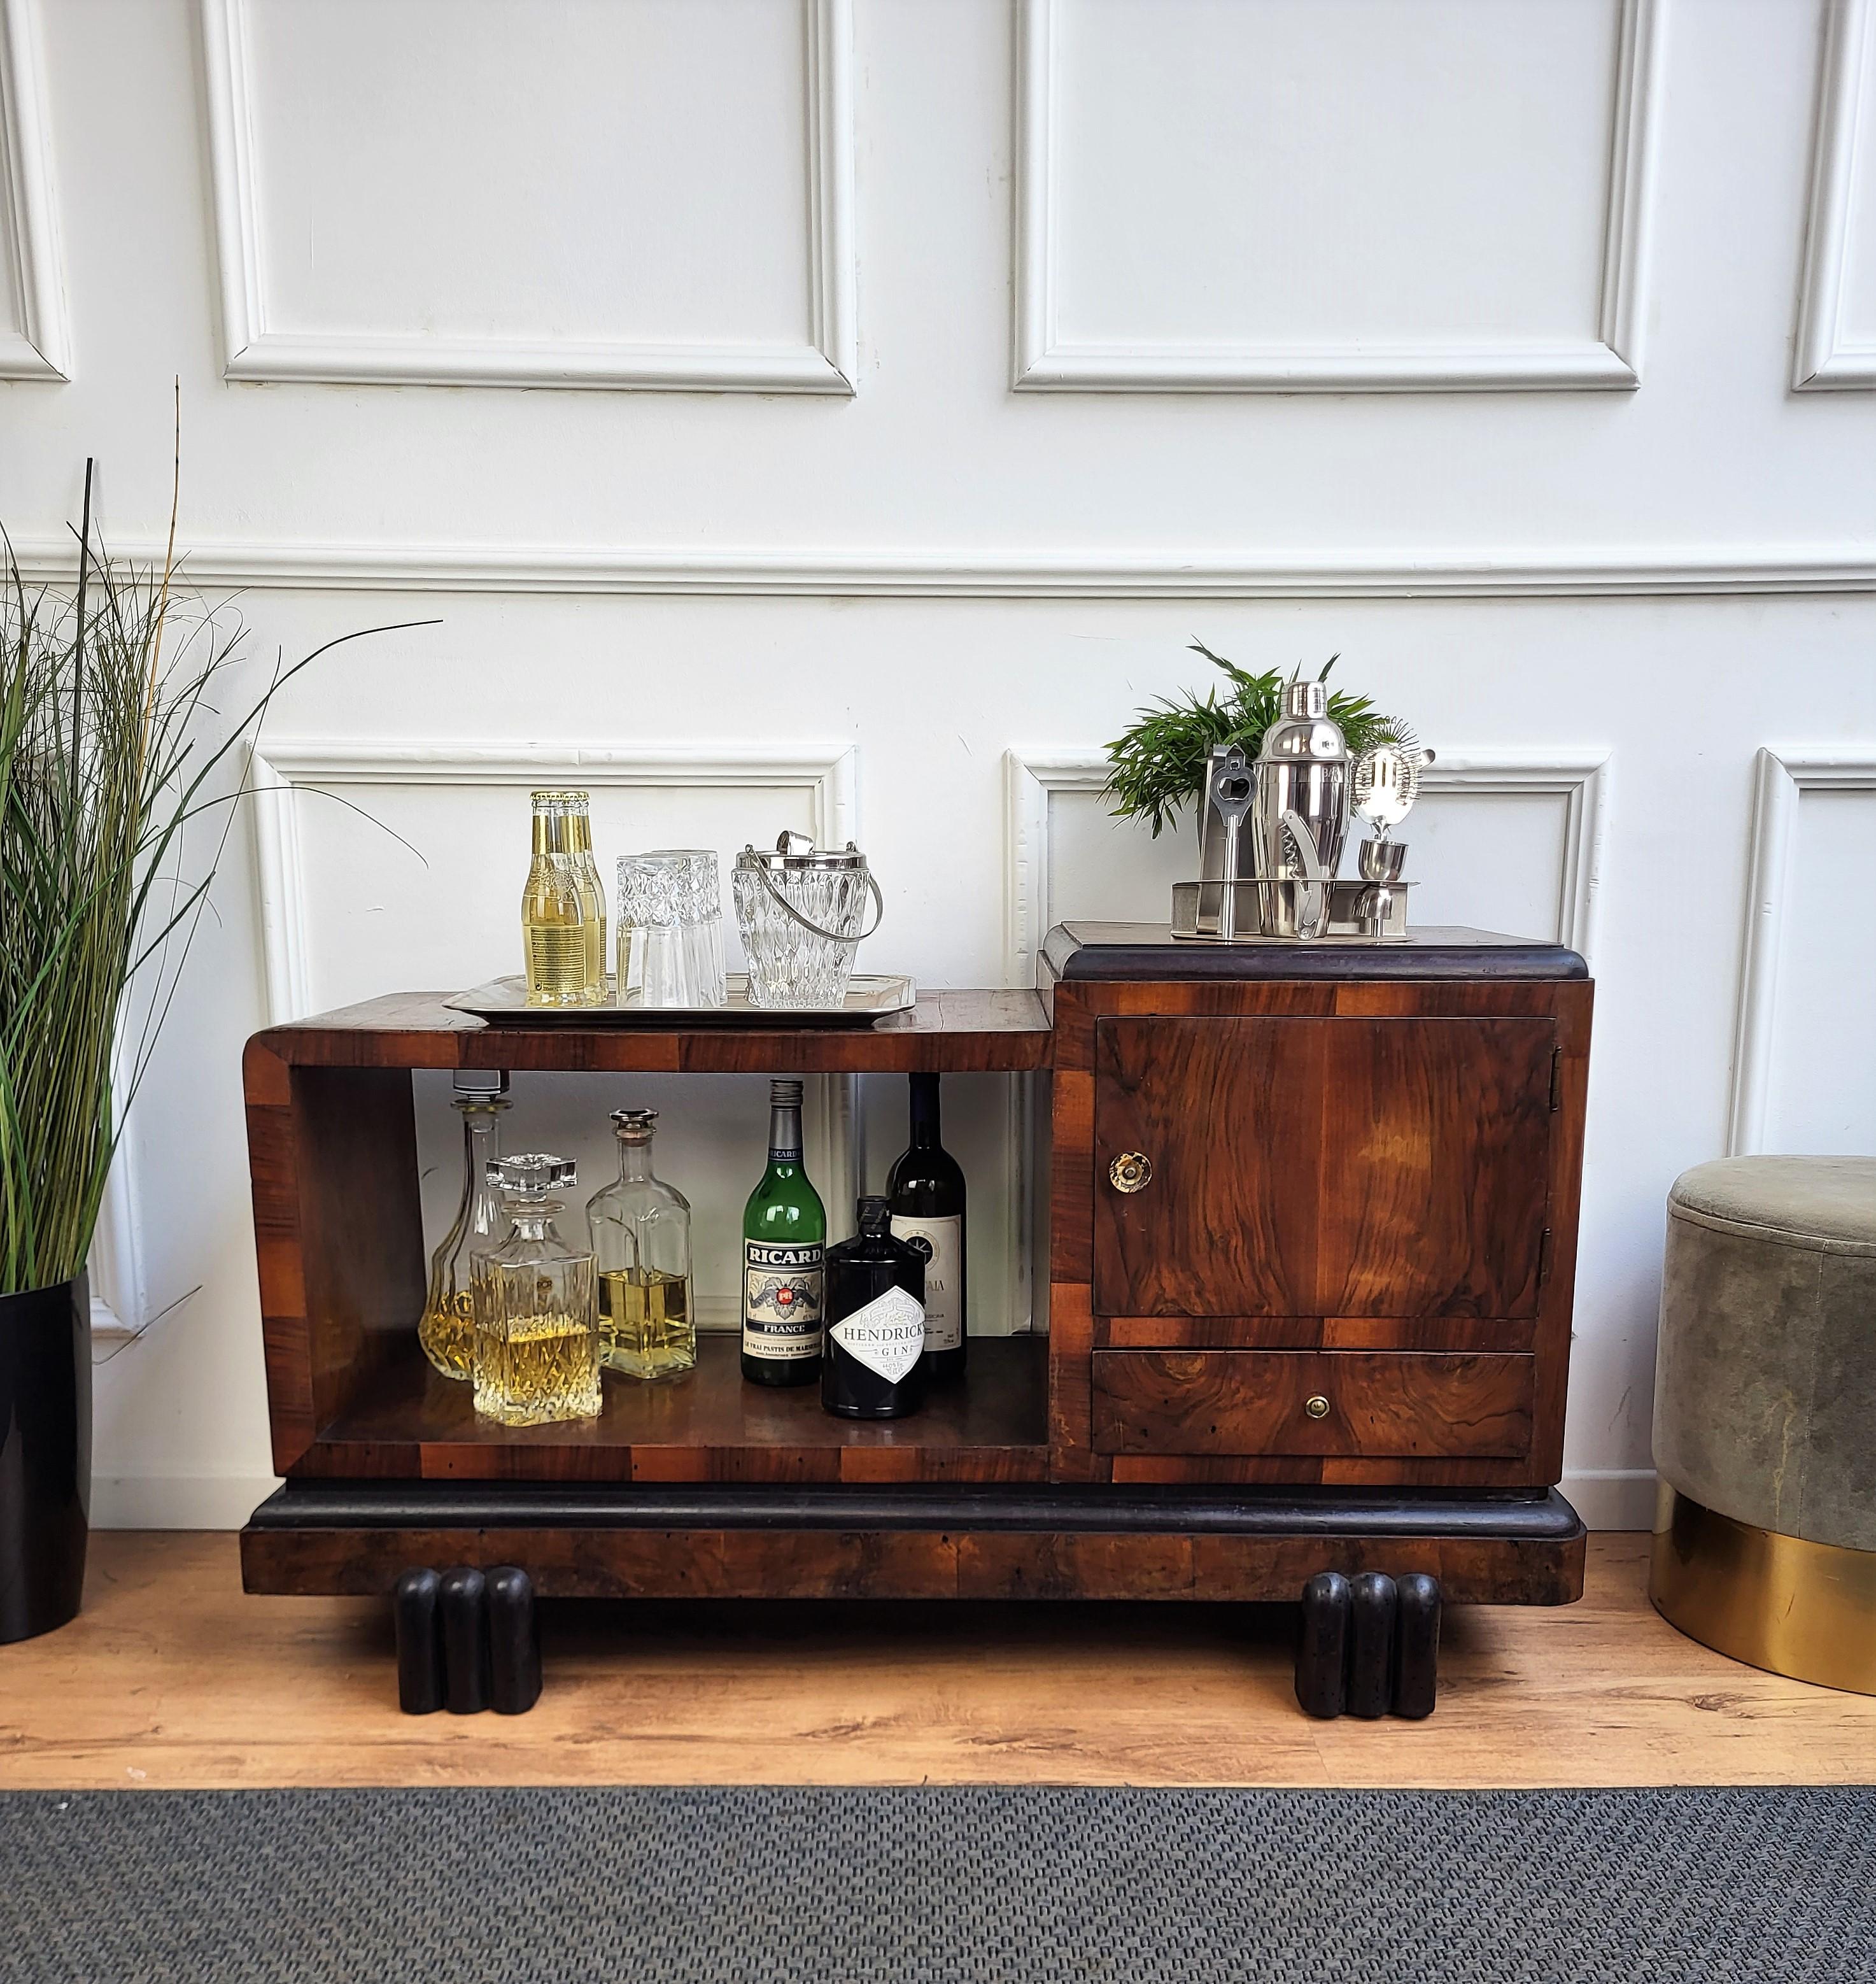 Very elegant Italian dry bar cabinet in typical Art Deco shape and materials with its beautiful veneer walnut briar burl wood, one door and a drawer both framed with wood veneer standing on 4 amazing feet. The Art Deco style, that preceded Hollywood